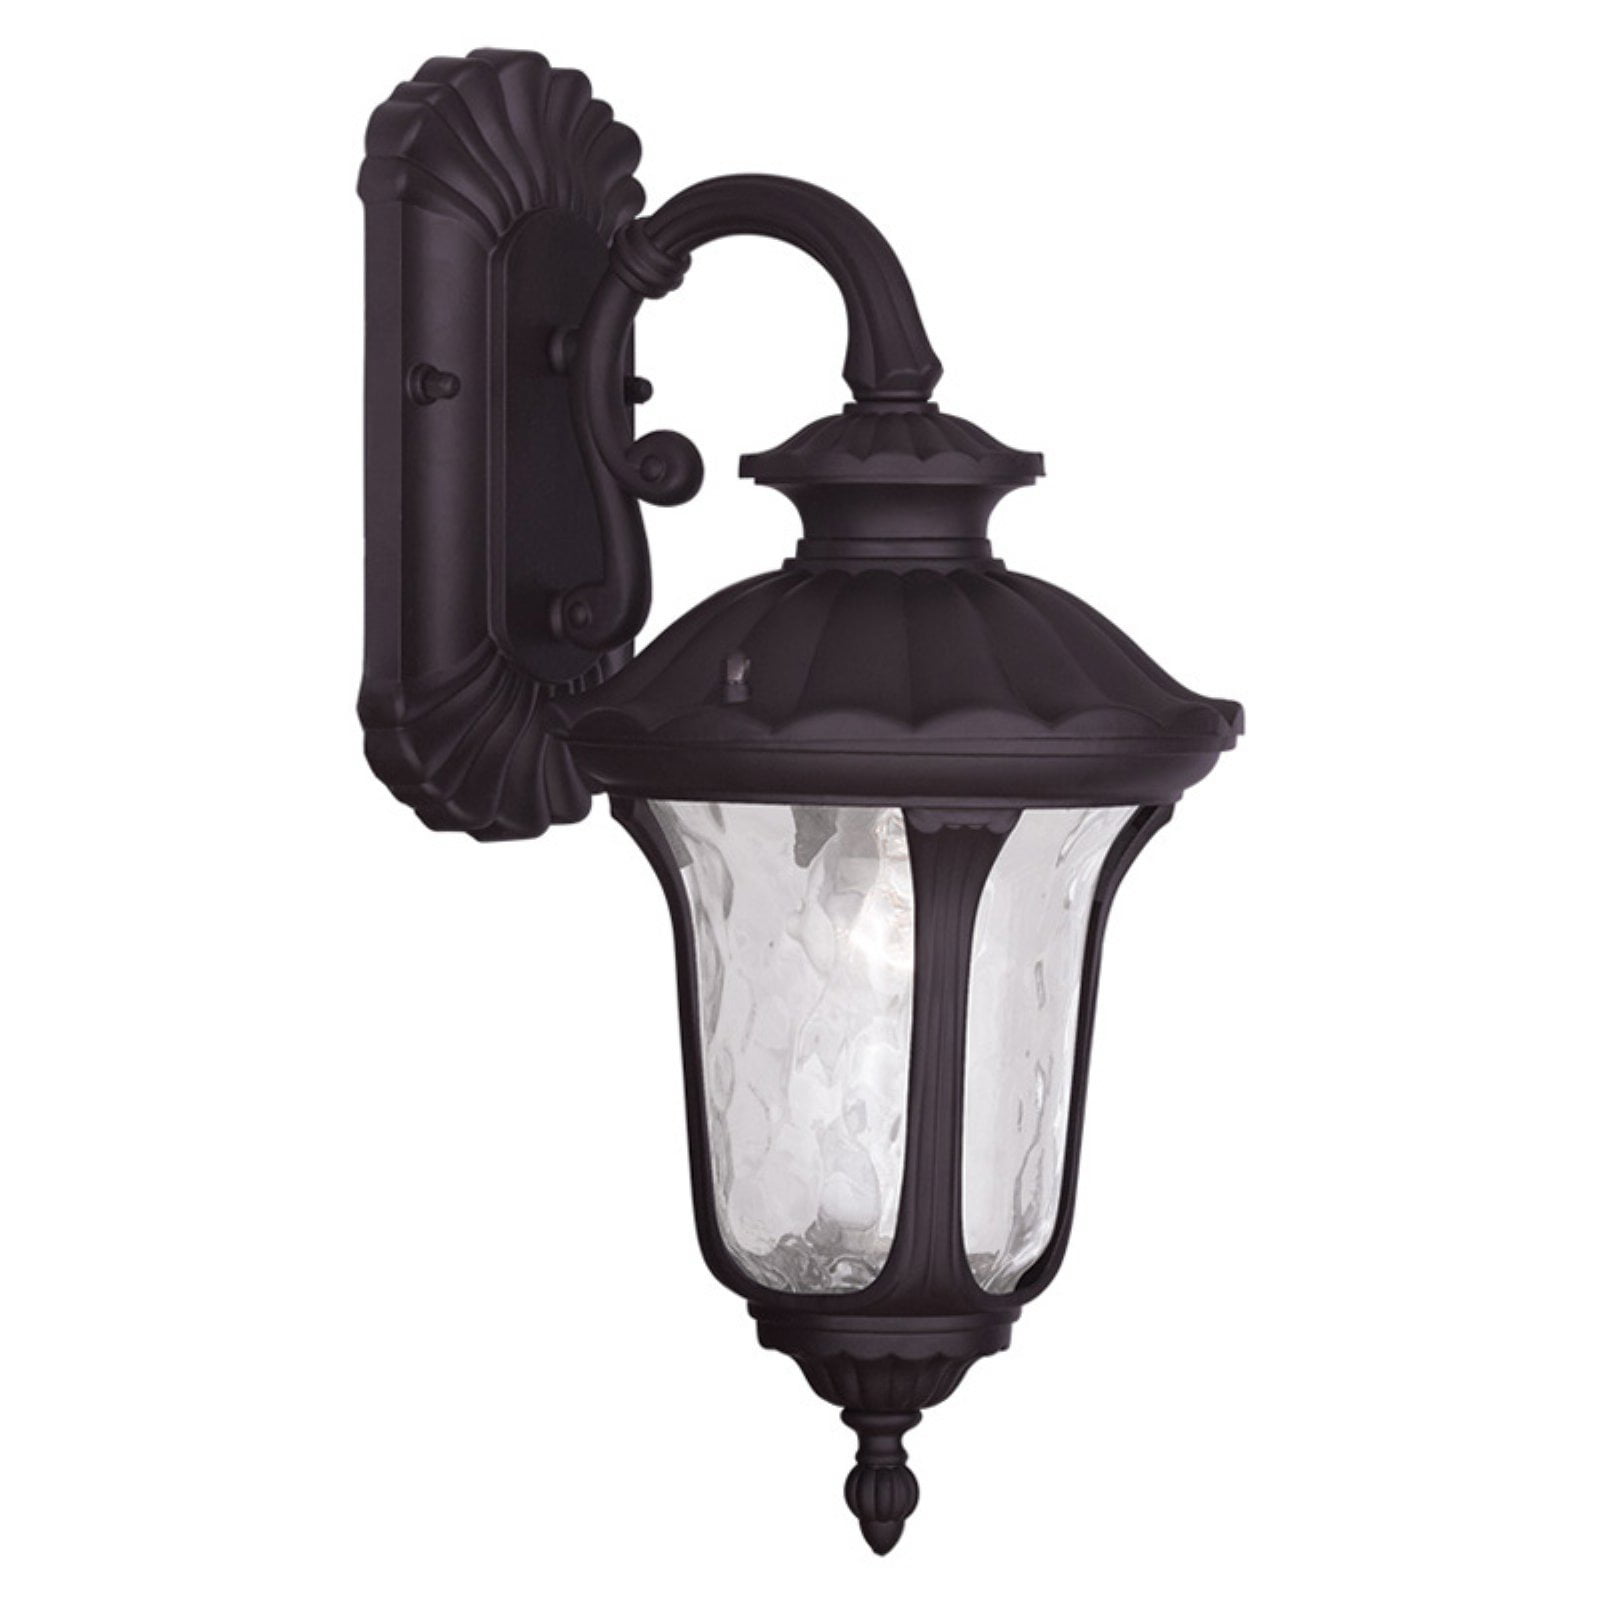 29H in. Bel Air Saddle Rock Outdoor Wall Light 